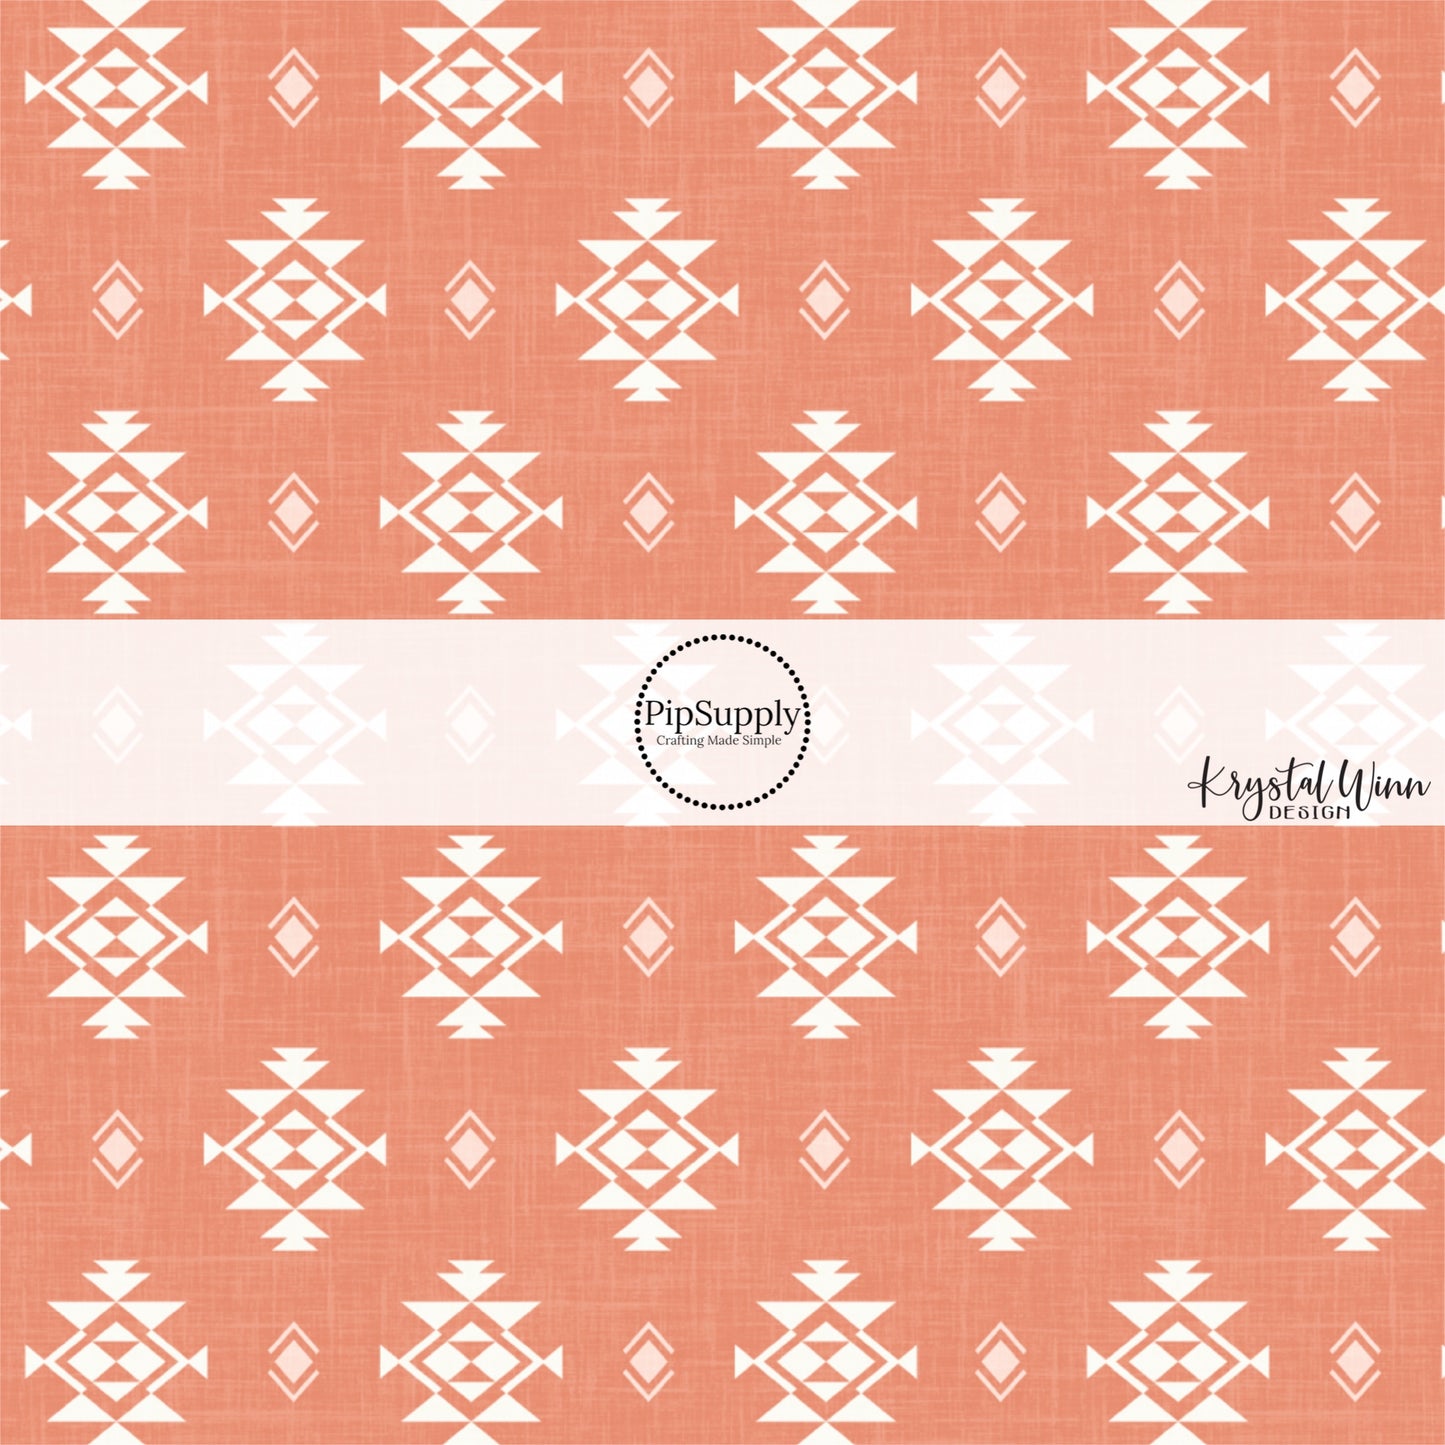 This summer fabric by the yard features western aztec pattern on terracotta. This fun summer themed fabric can be used for all your sewing and crafting needs.